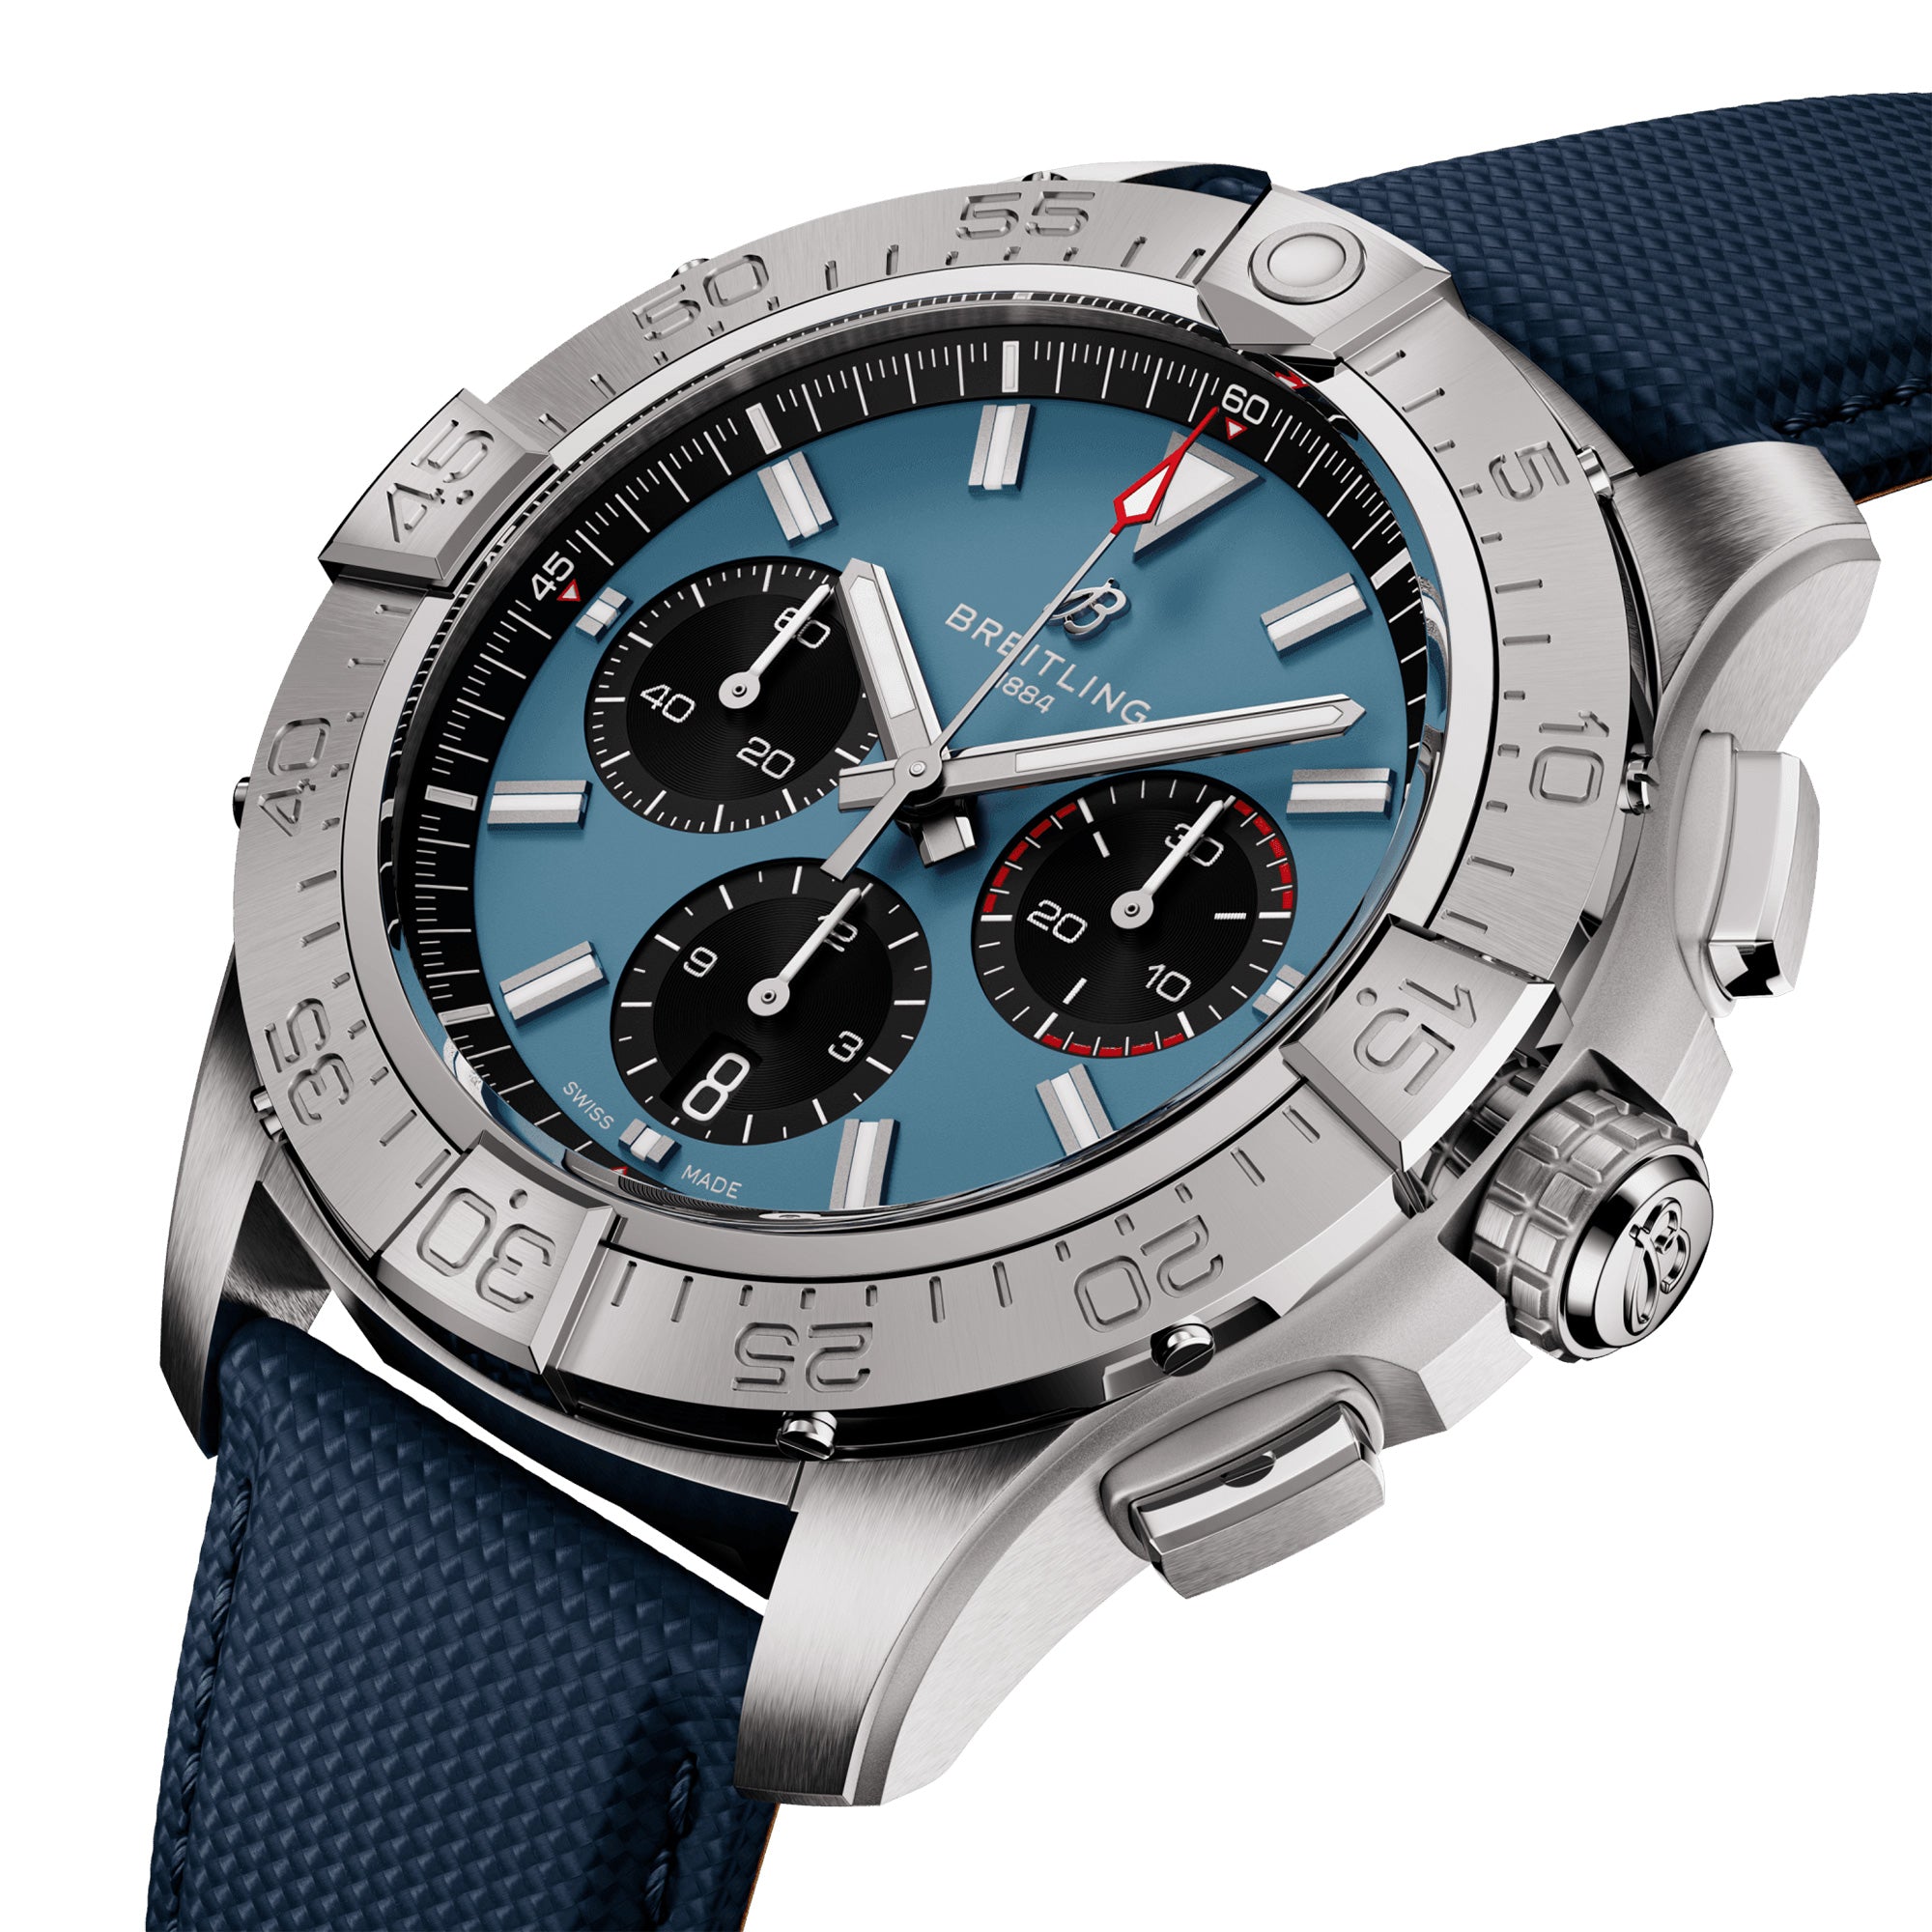 Avenger 44mm Blue Dial Automatic Chronograph Strap Watch